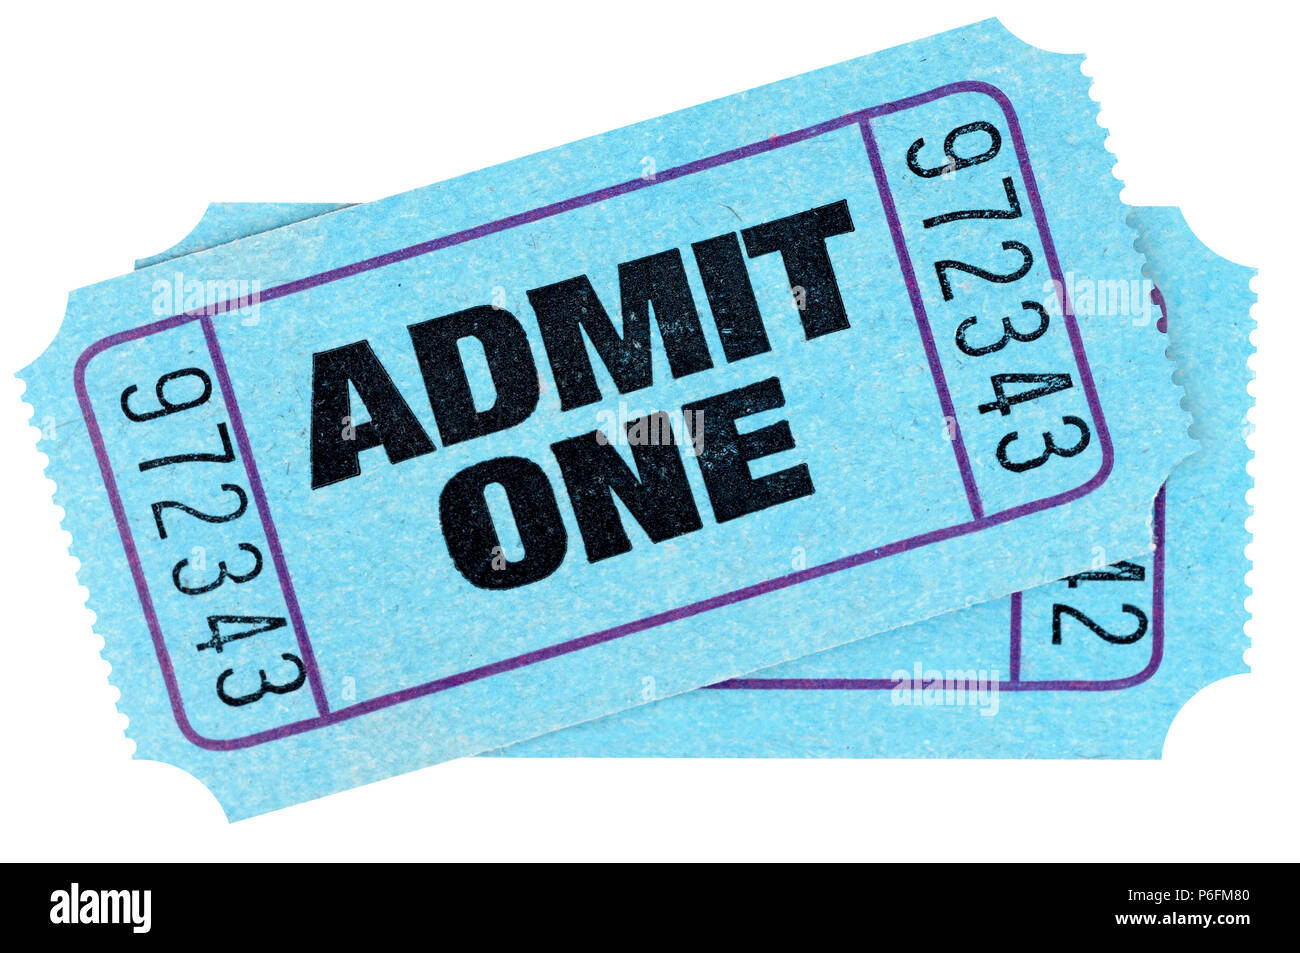 Two blue admit one movie tickets isolated on white background. Stock Photo